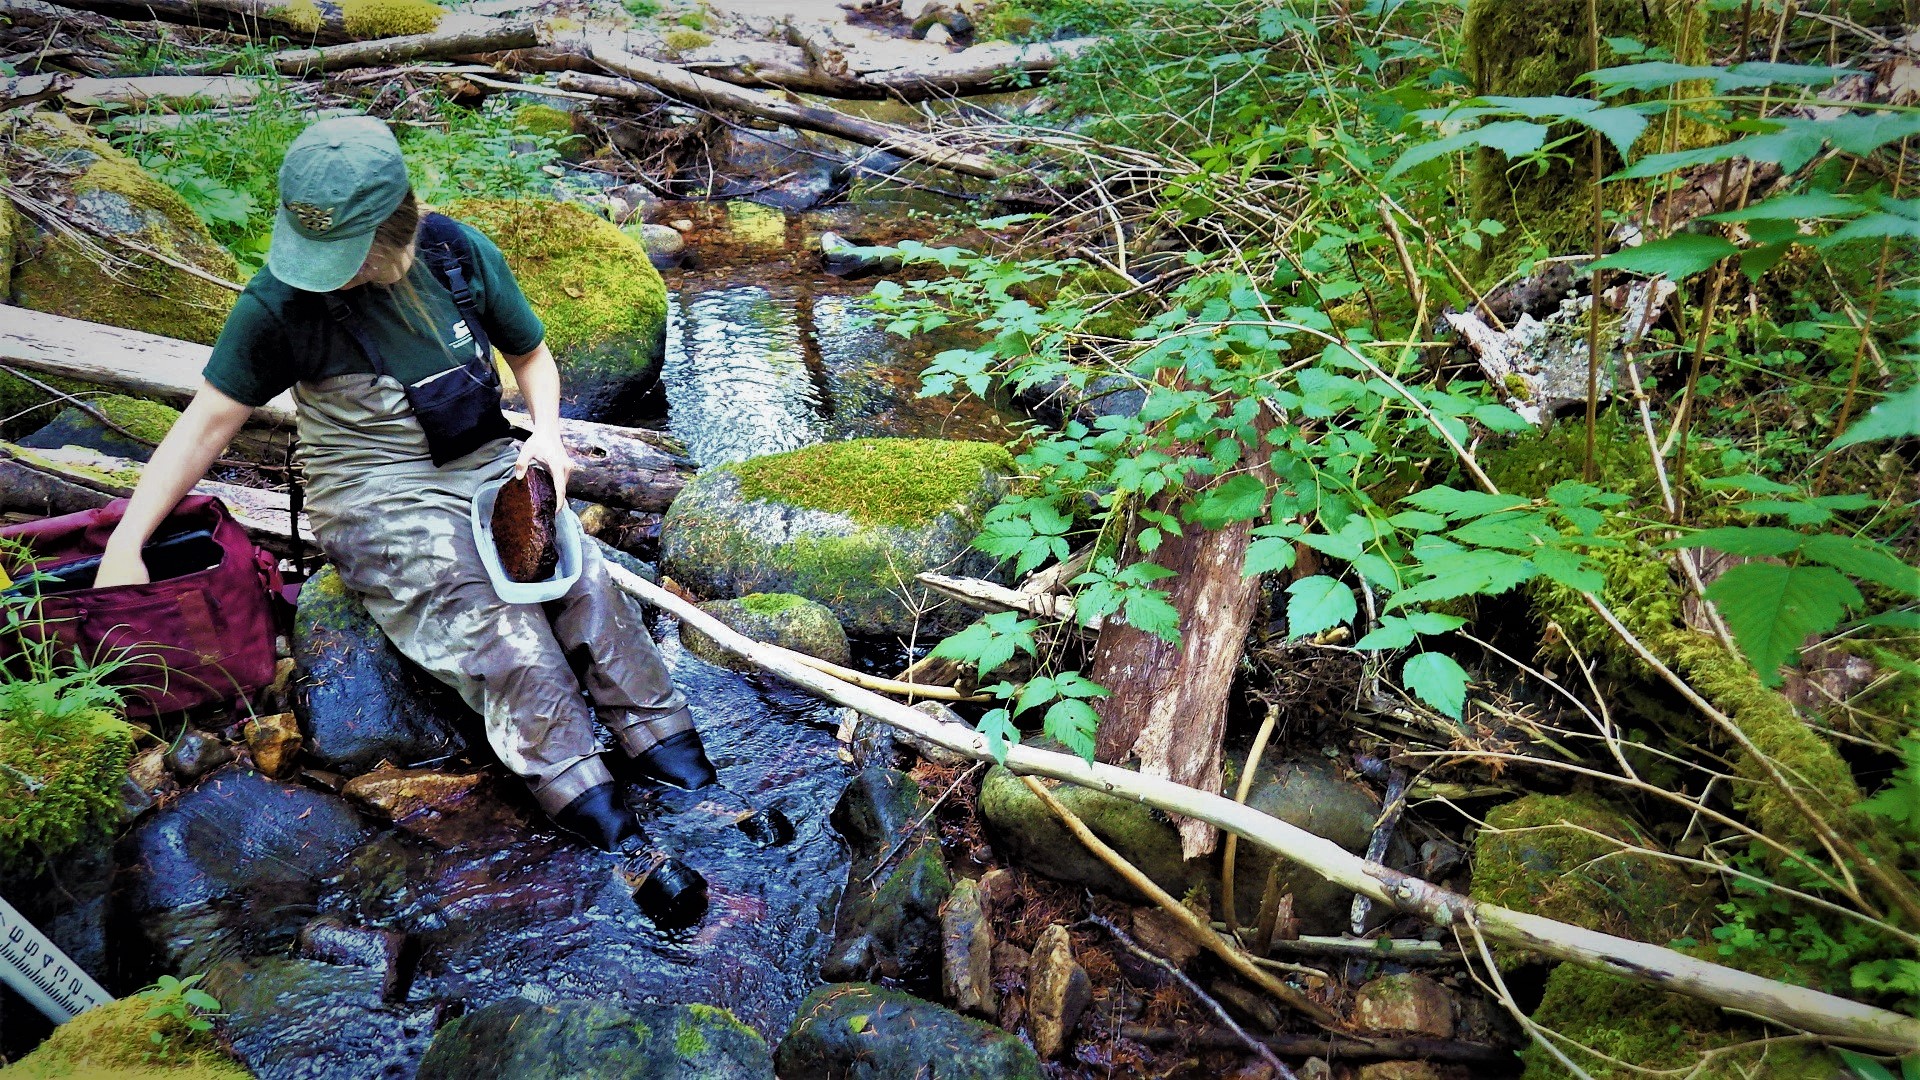 A crewmember scraping algae from rocks at a stream